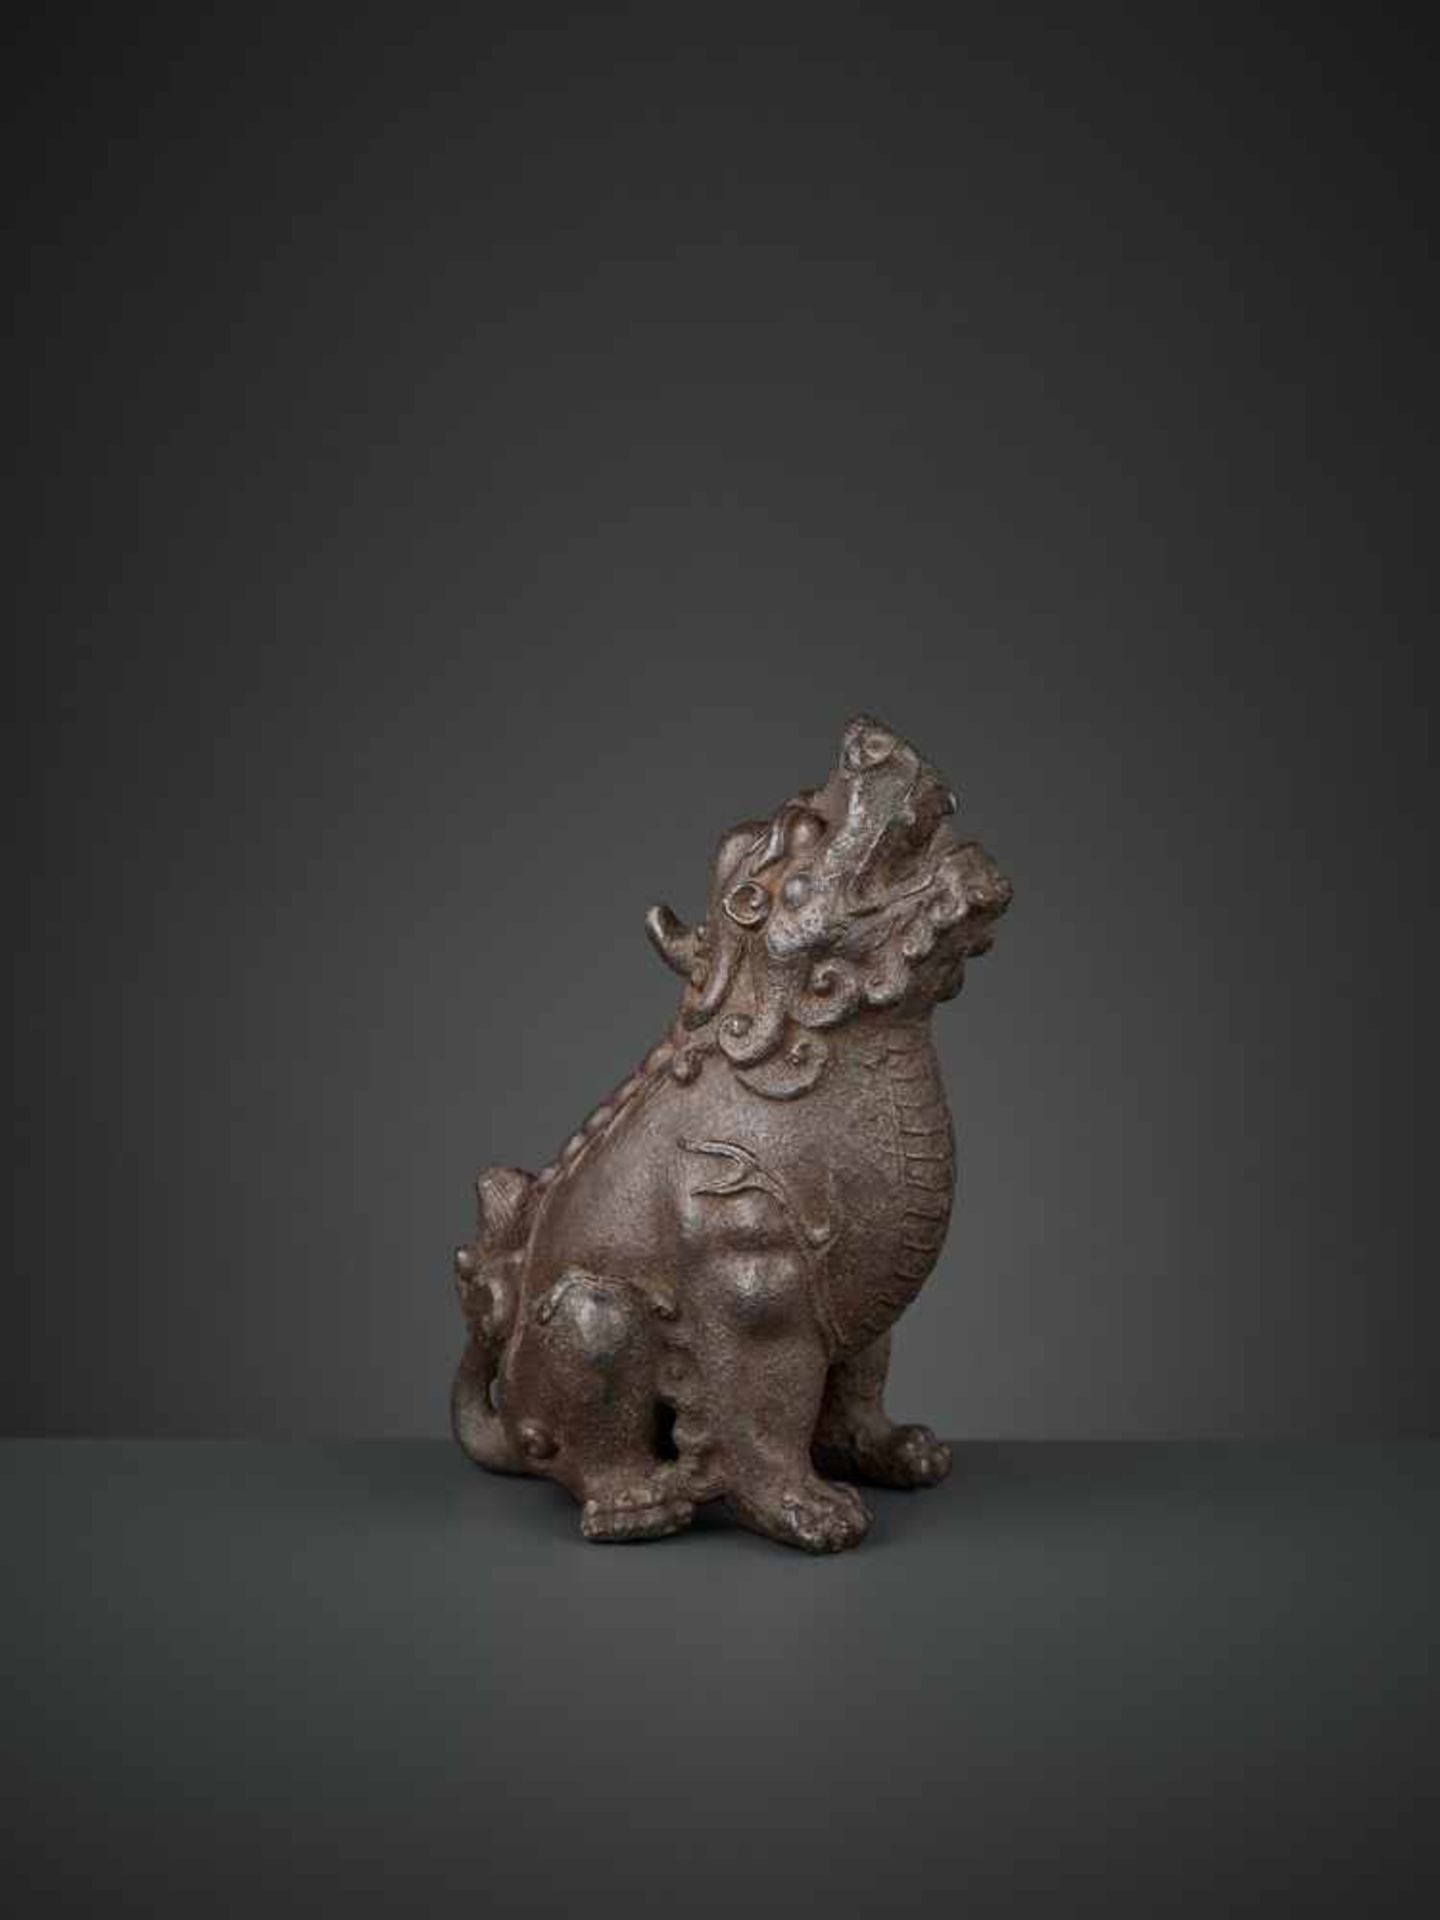 A ROARING QILIN, EARLY MING DYNASTY China, 14th-15th century. The mythical beast well cast and